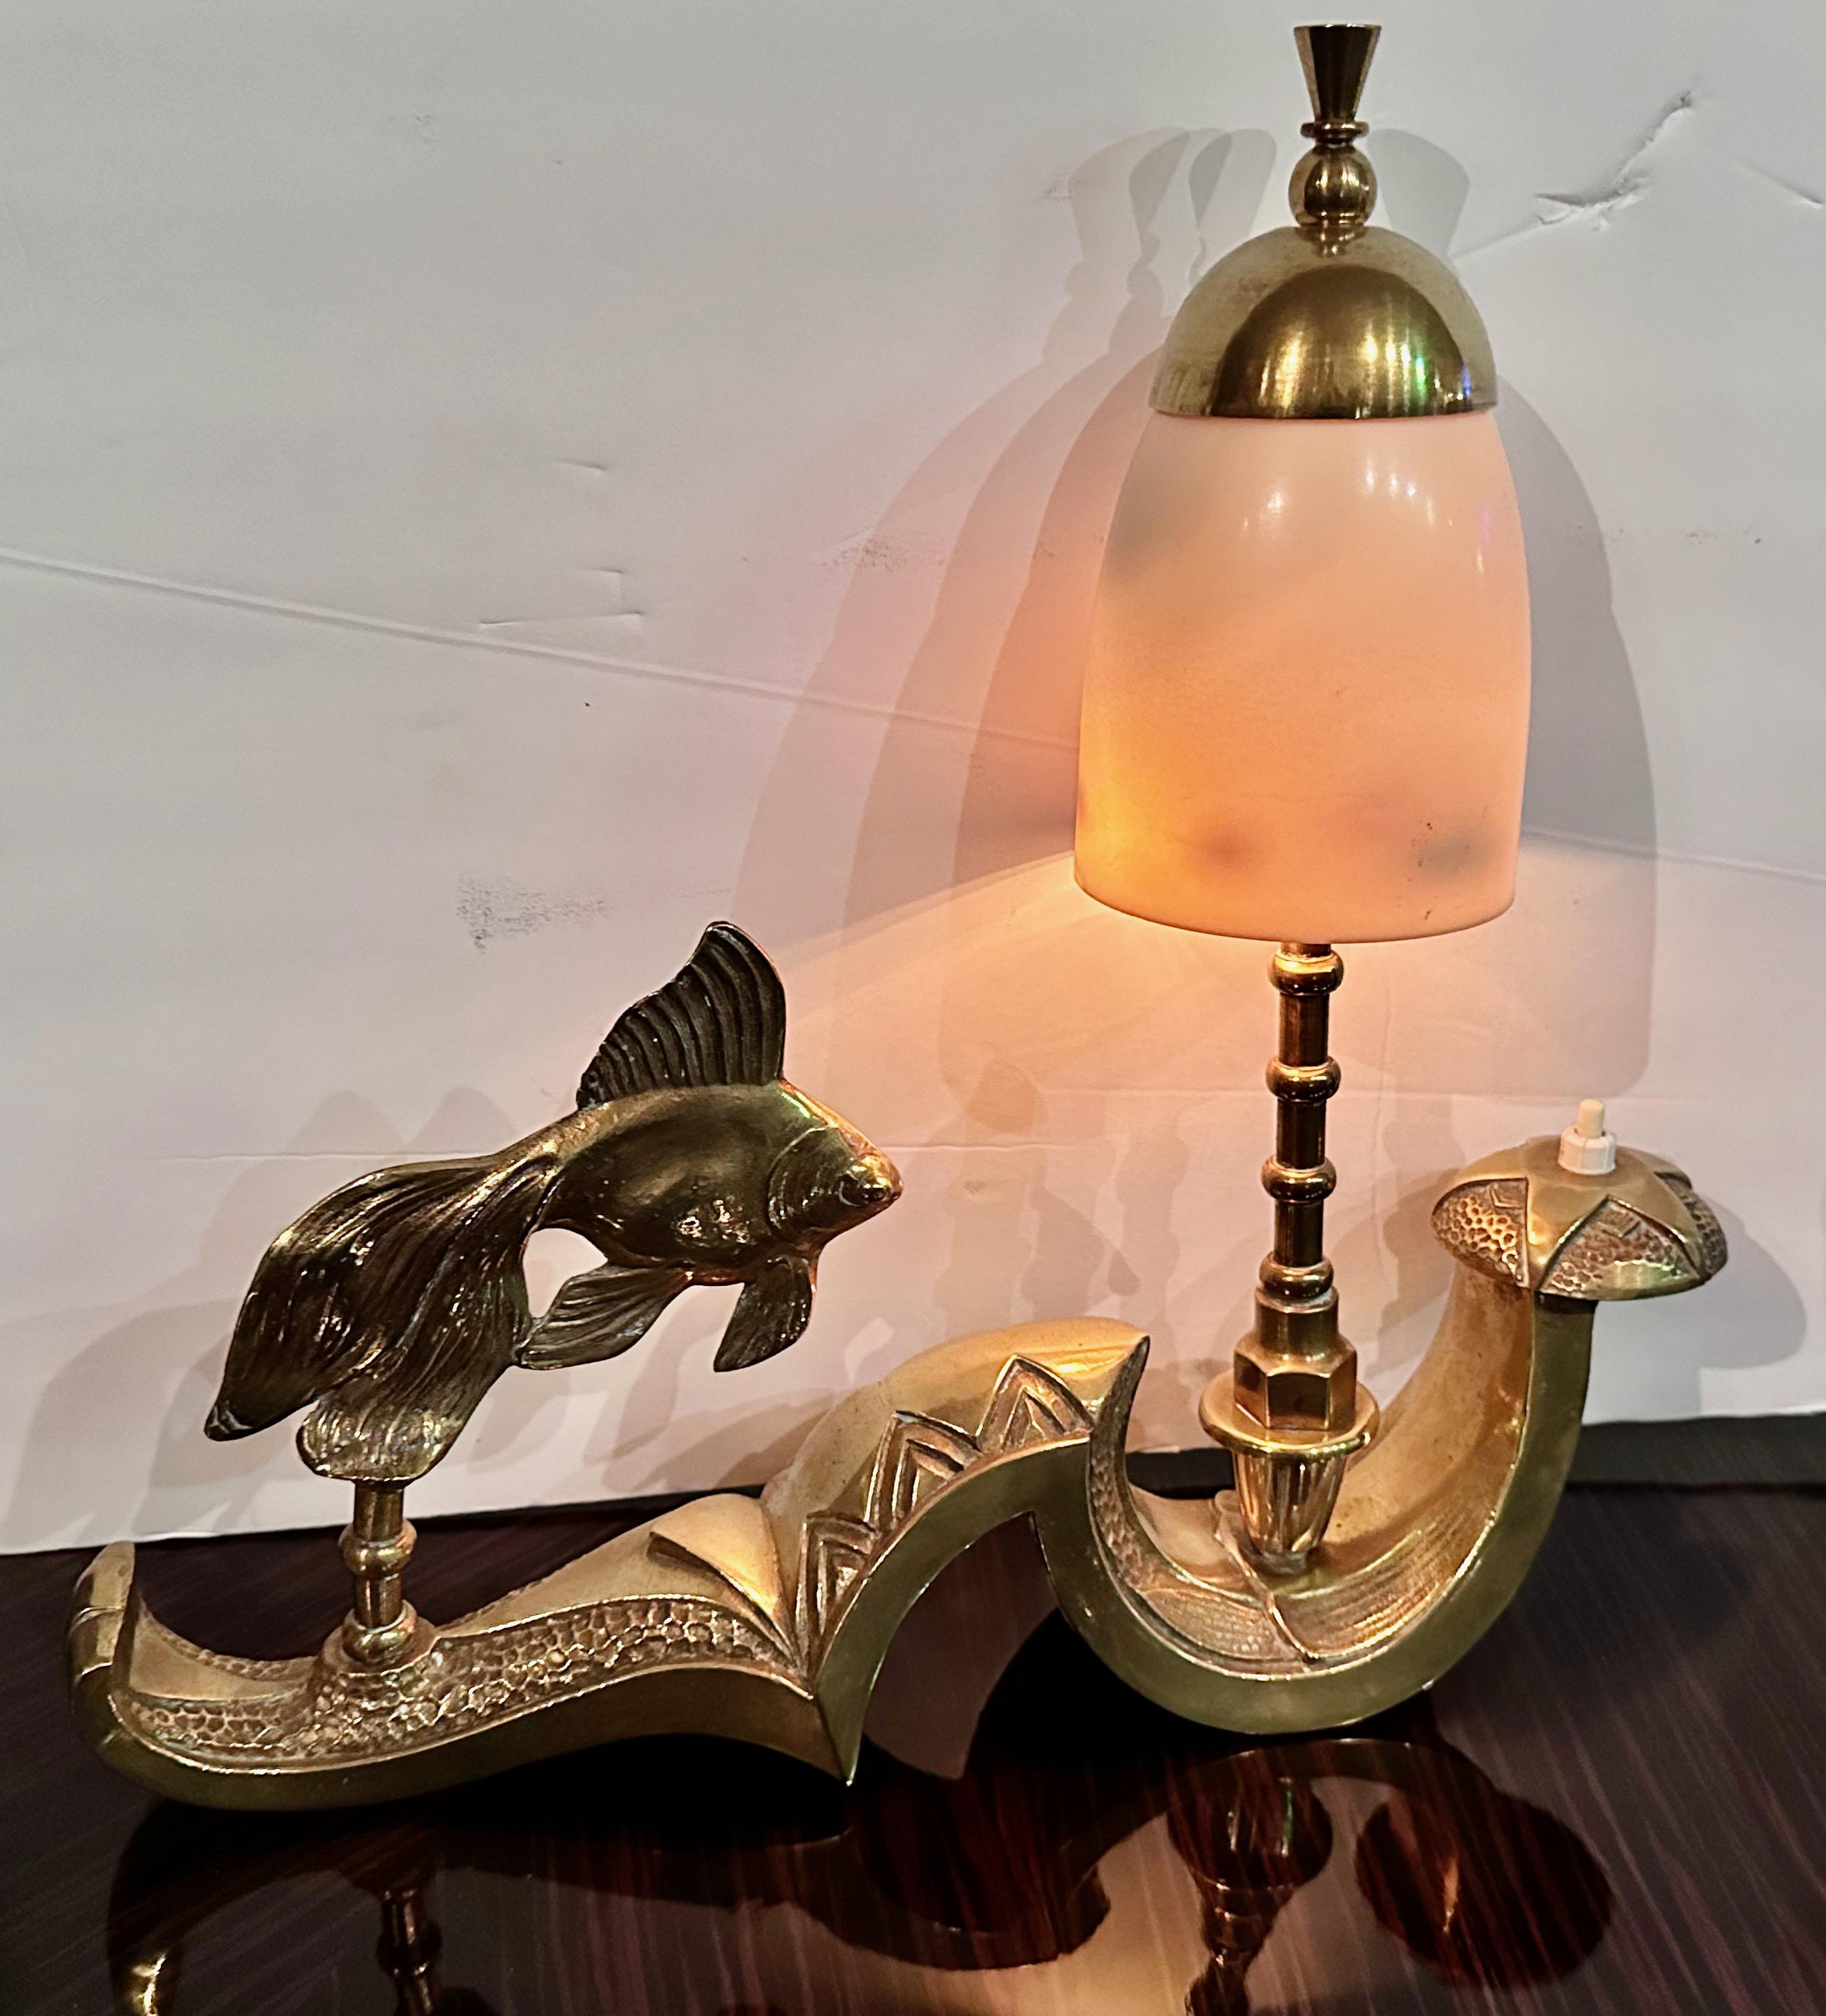 Art Deco Fish Sculpture Table Lamp from France is a one-of-a-kind piece crafted in brass, featuring an integrated accent light and an ornate base design. Its intricate texture and meticulous attention to detail suggest a significant investment of